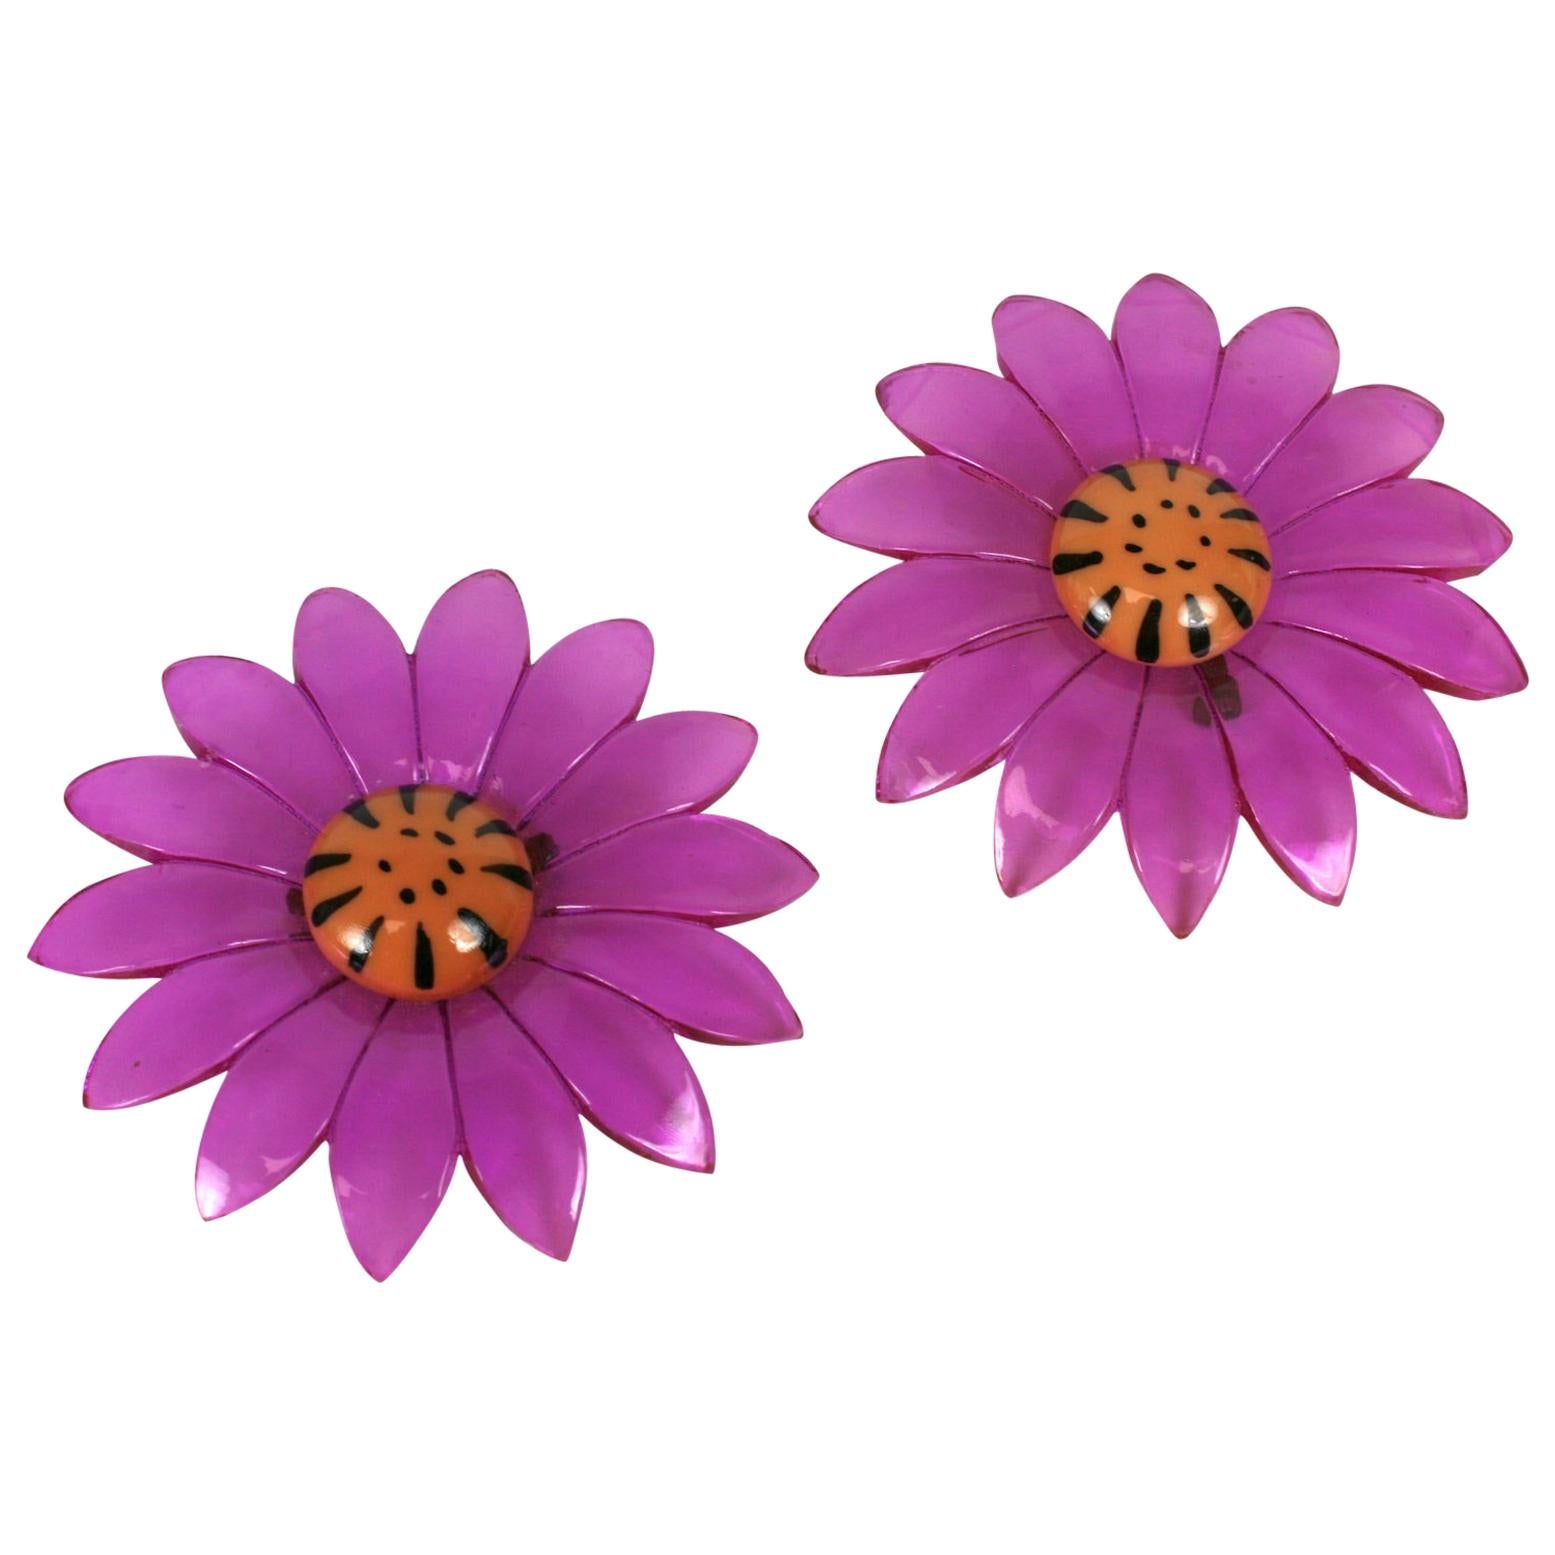 Pair of Mod Lucite Daisy Brooches